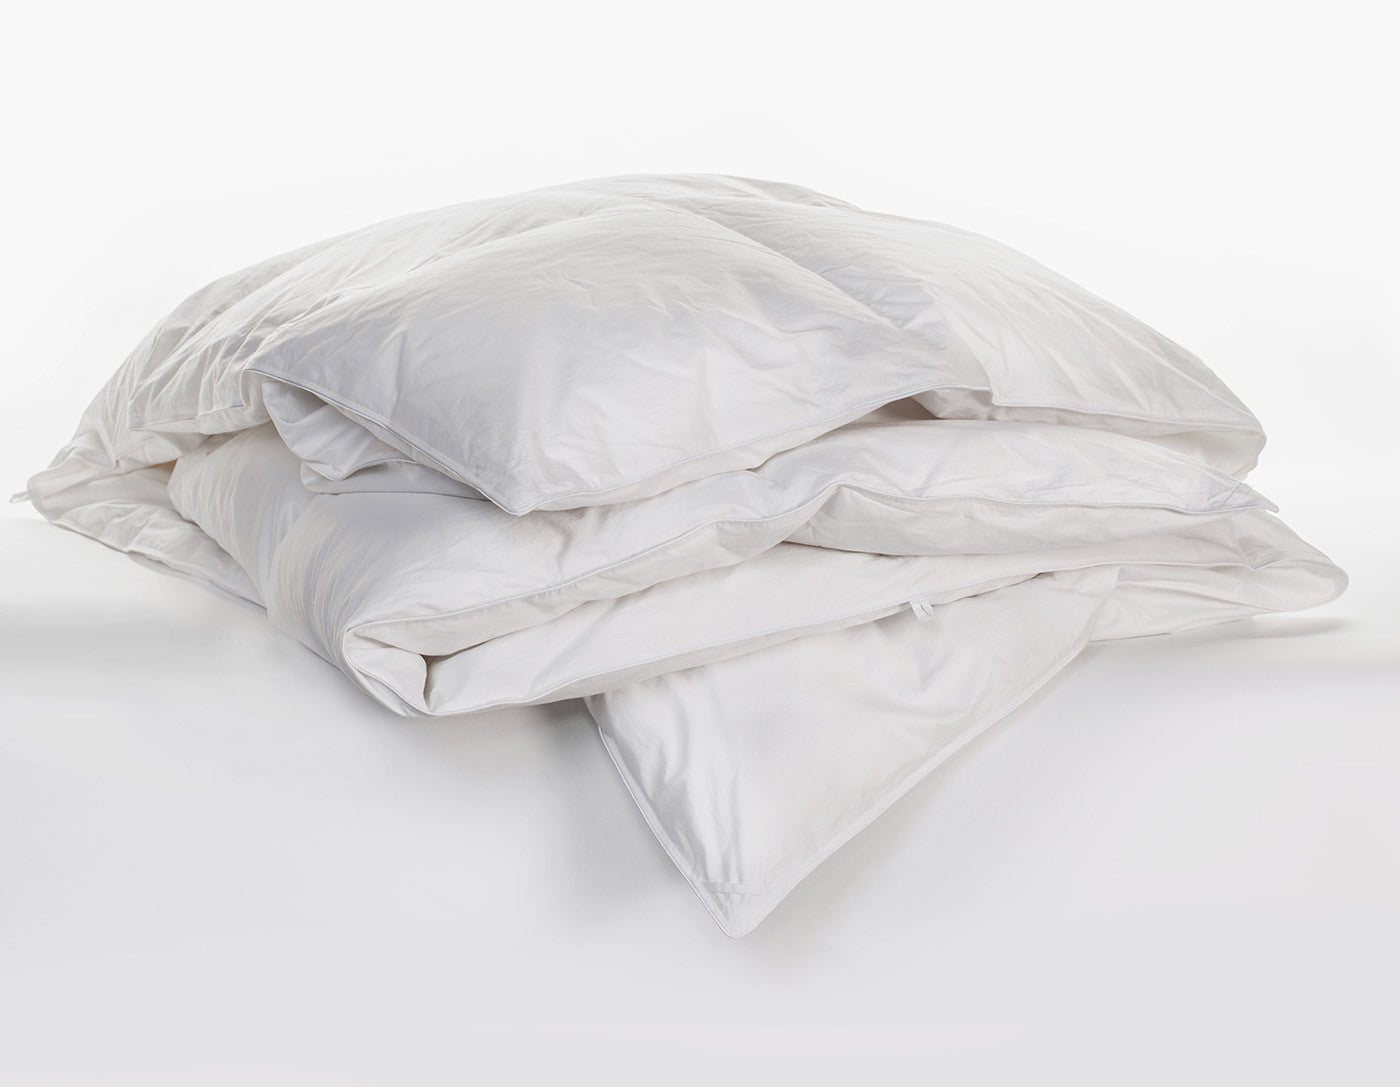 sequoia midweight 700 fill power comforter duvet insert by ogallala comfort on adorn.house